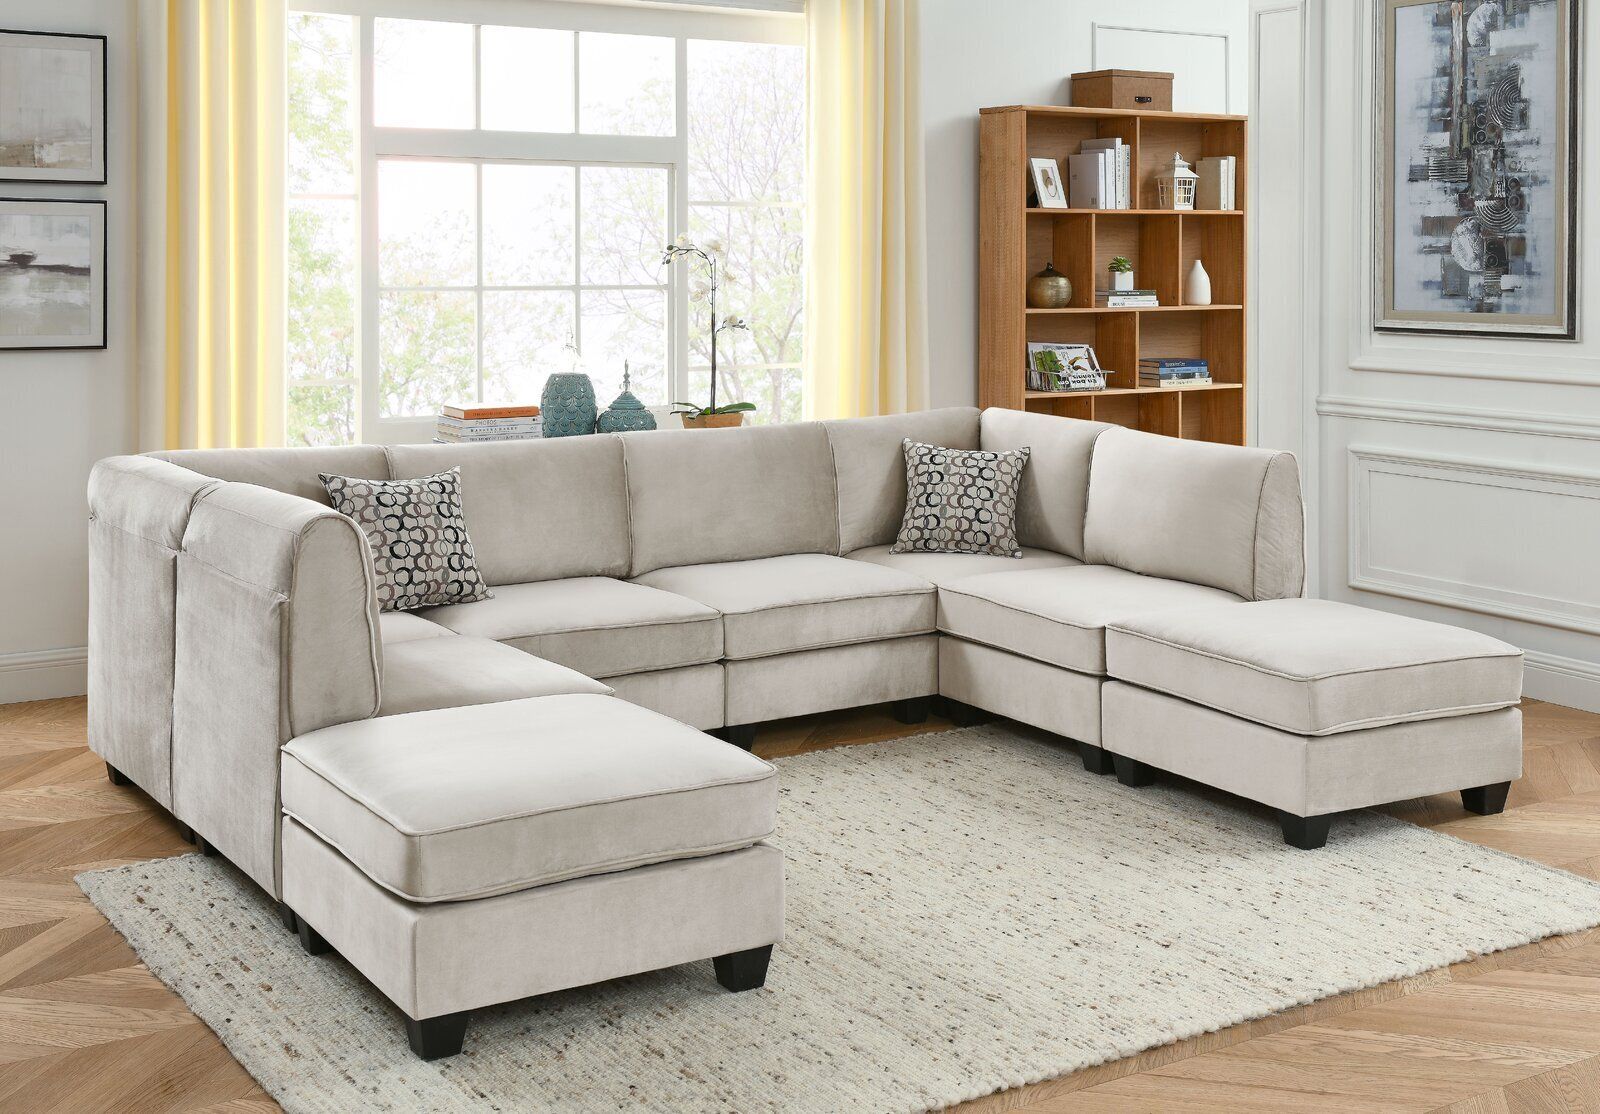 Sectional Sofa With Ottoman – Ideas On Foter Intended For Sectional Sofas With Ottomans And Tufted Back Cushion (View 7 of 15)